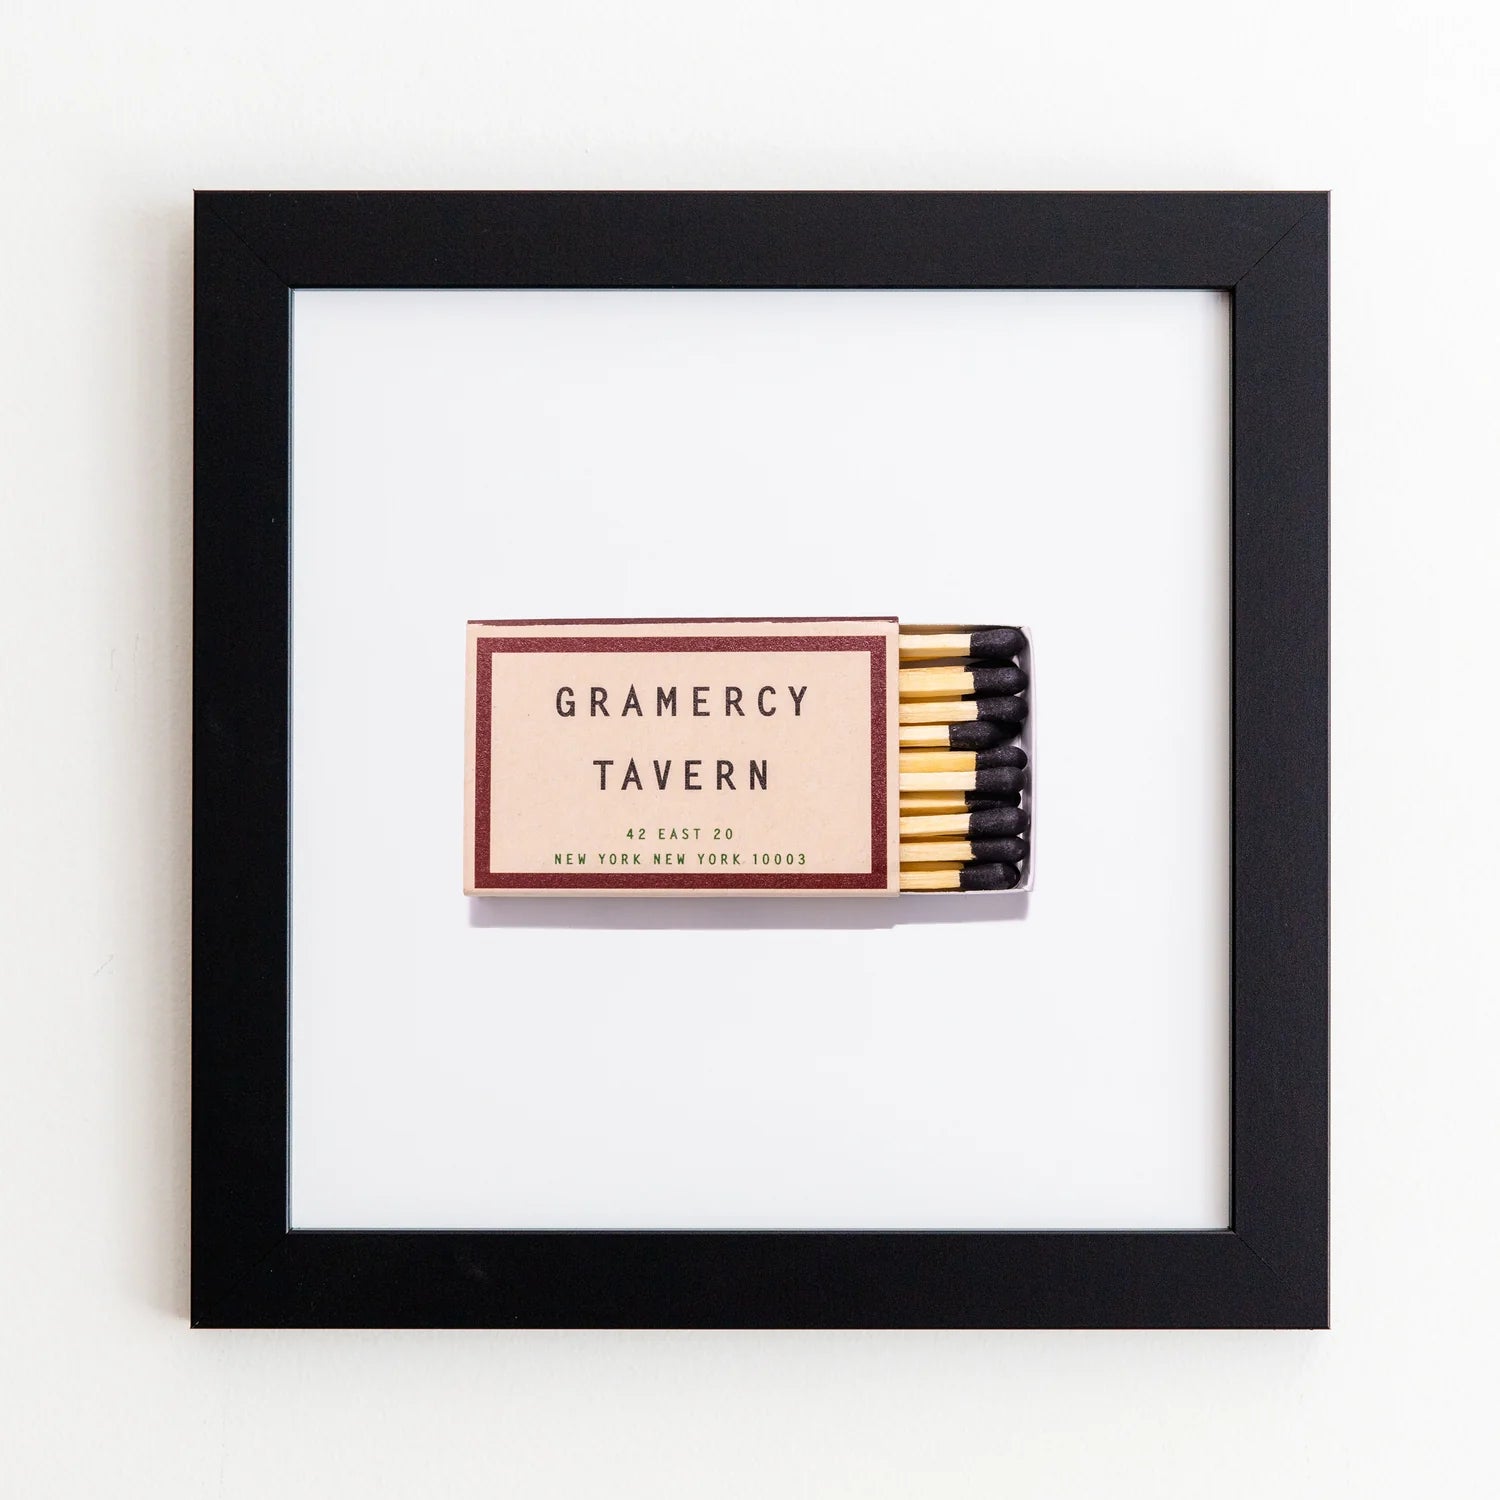 A framed matchbook from Gramercy Tavern in New York City, displayed against a white background. The matchbook features a classic design with the restaurant&#39;s name and address, encased in an Art Square Black Frame by Match South.